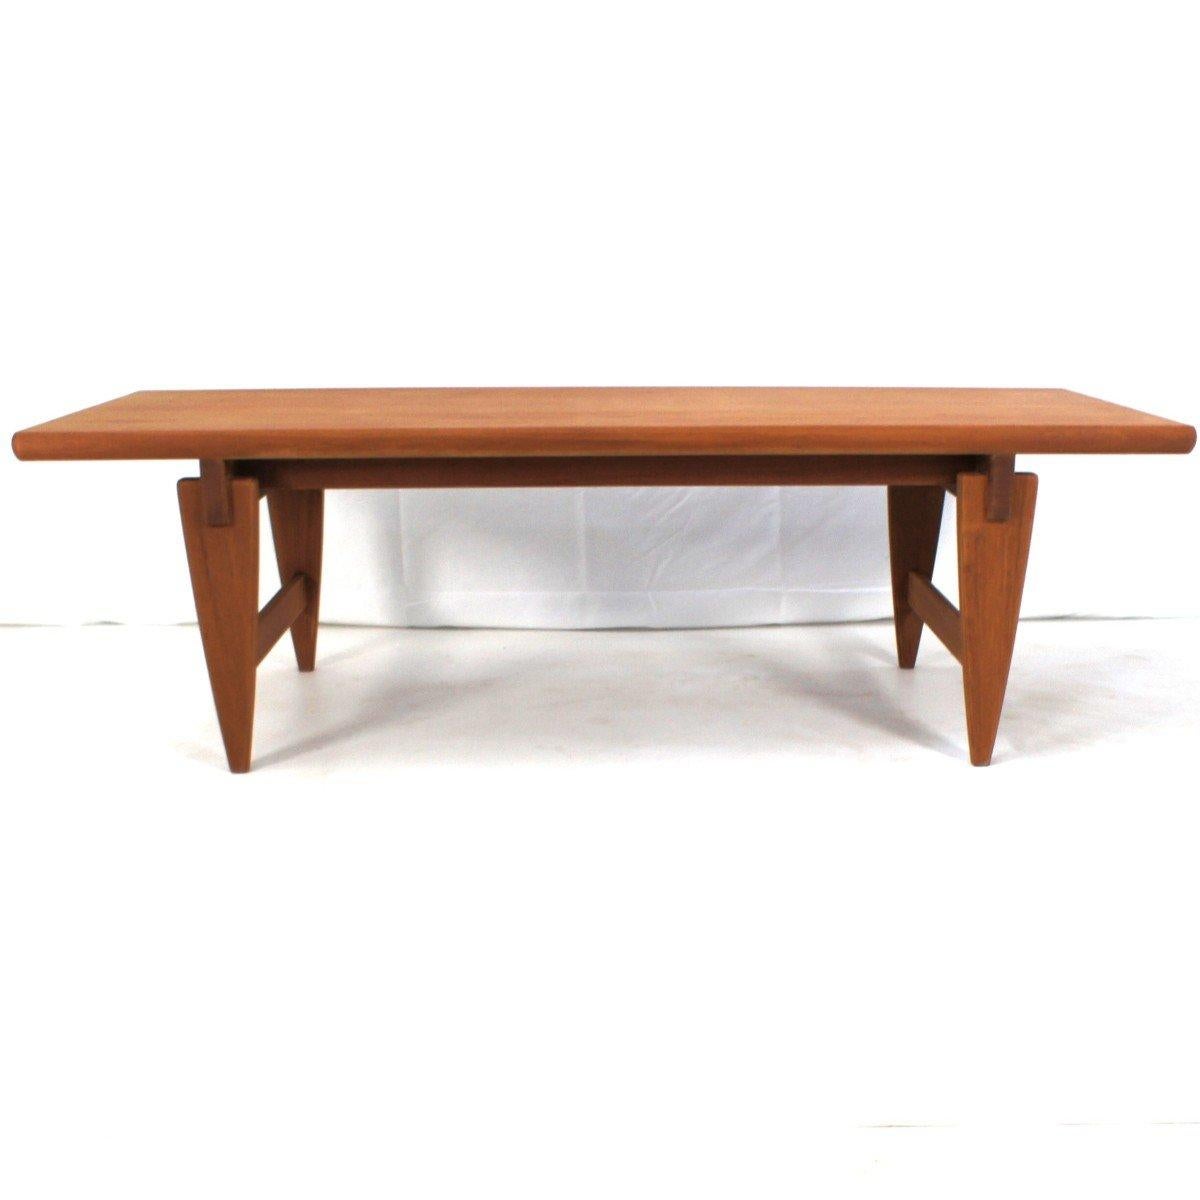 Important brutalist coffee table, Scandinavian, in teak, exotic wood sleepers. This exceptional table for its quality and dimensions will be perfect in vintage or contemporary furnishings or as a table for a flat screen.